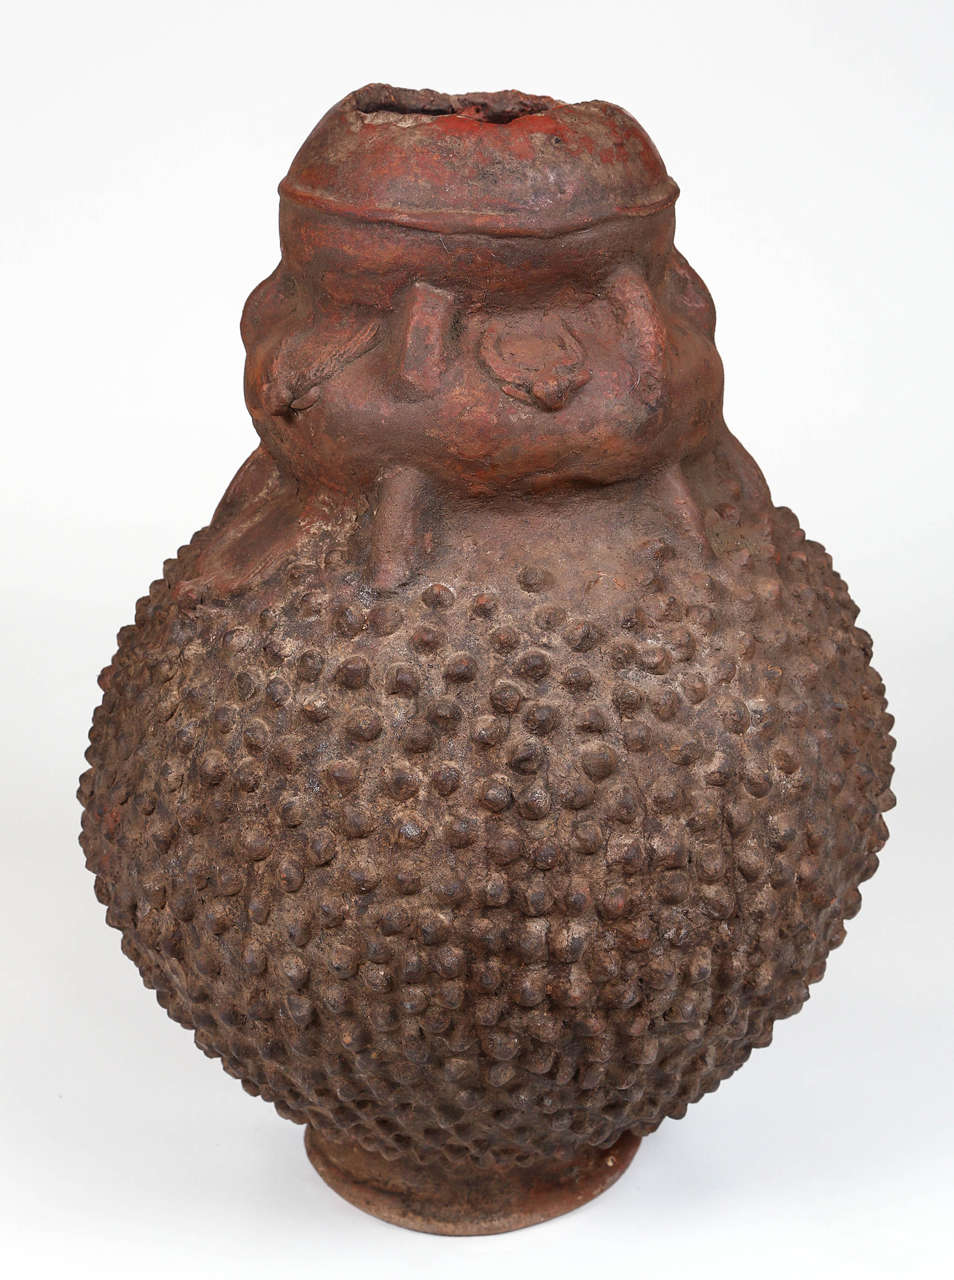 Volcanic clay Lobi pot with an arrangement of rounded points and decorative asymmetrical top. This pot was executed in the late 1920s.

The Lobi are an ethnic group that originated in what is today Ghana. Starting circa 1770 many of the Lobi